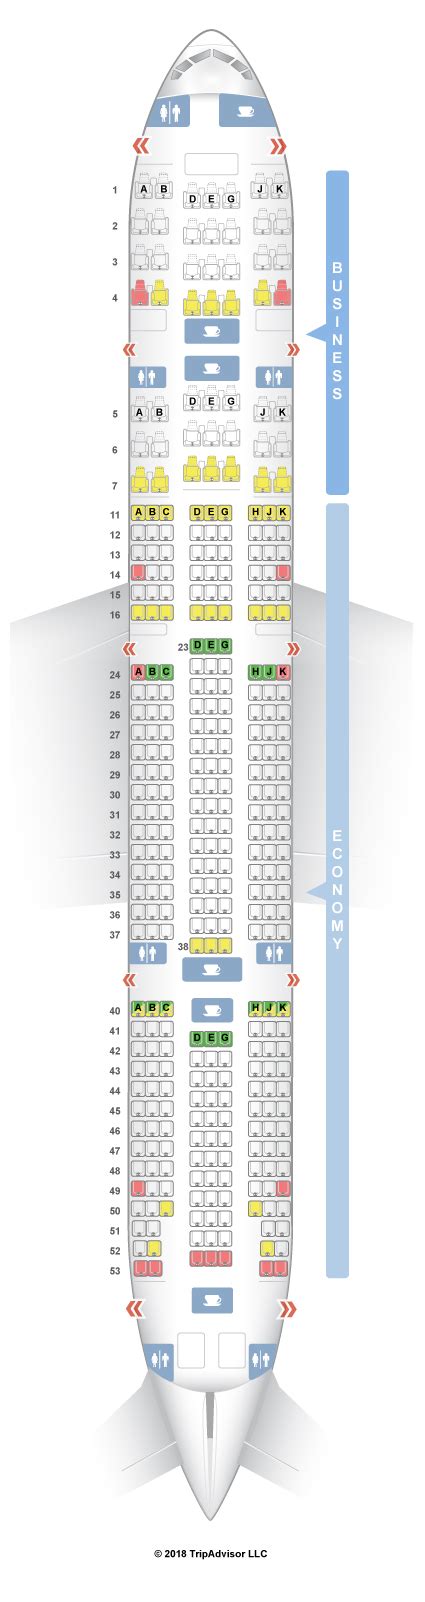 turkish airlines seat reservations